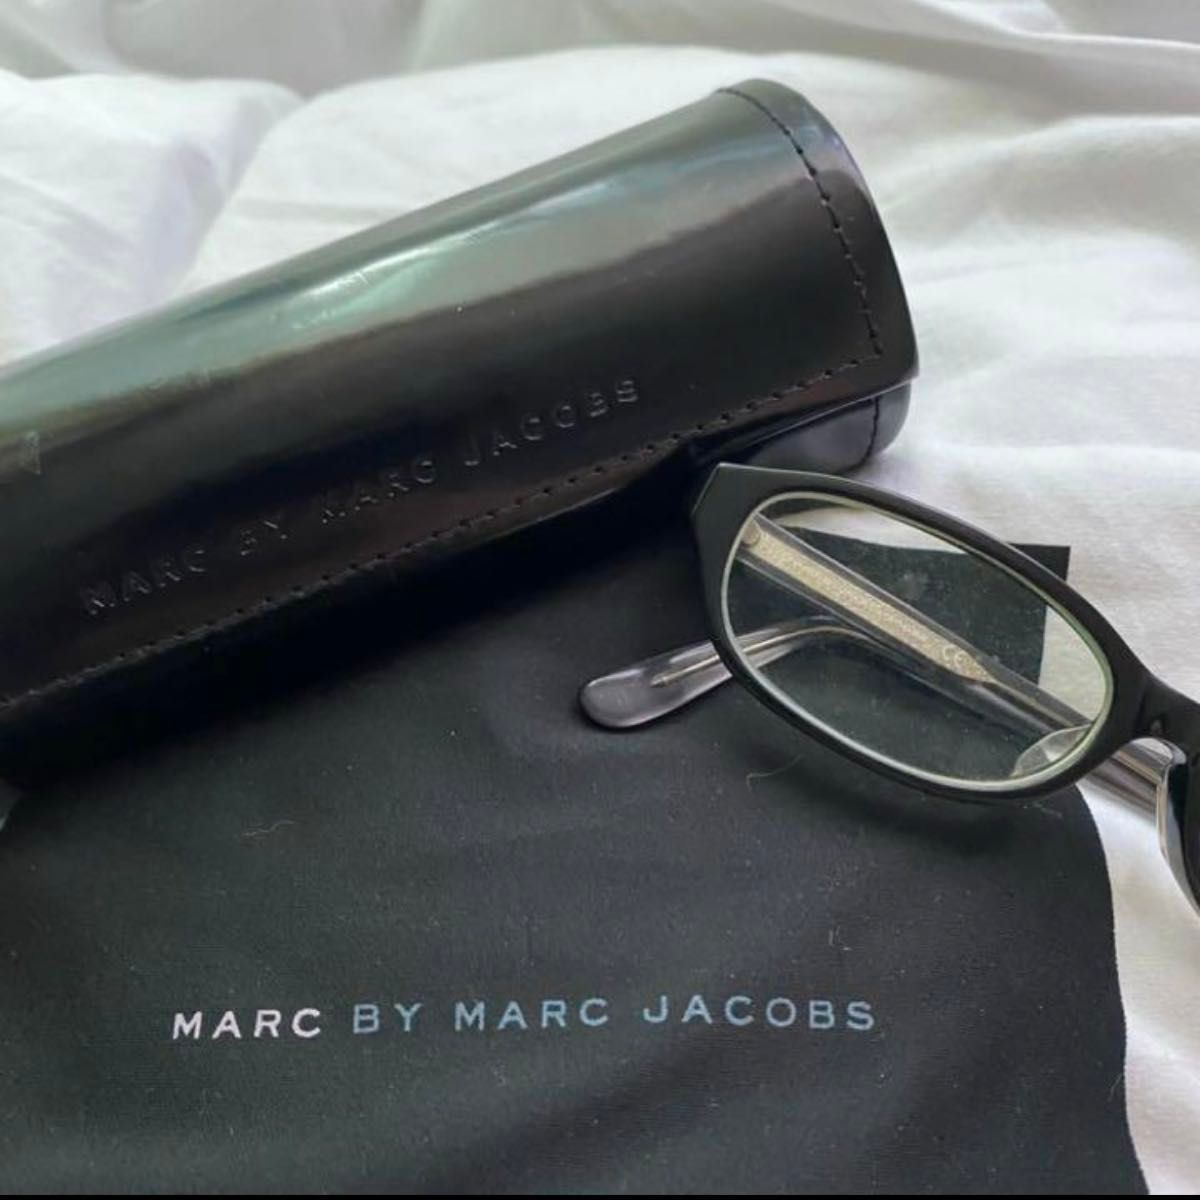 Marc by Marc Jacobs 眼鏡